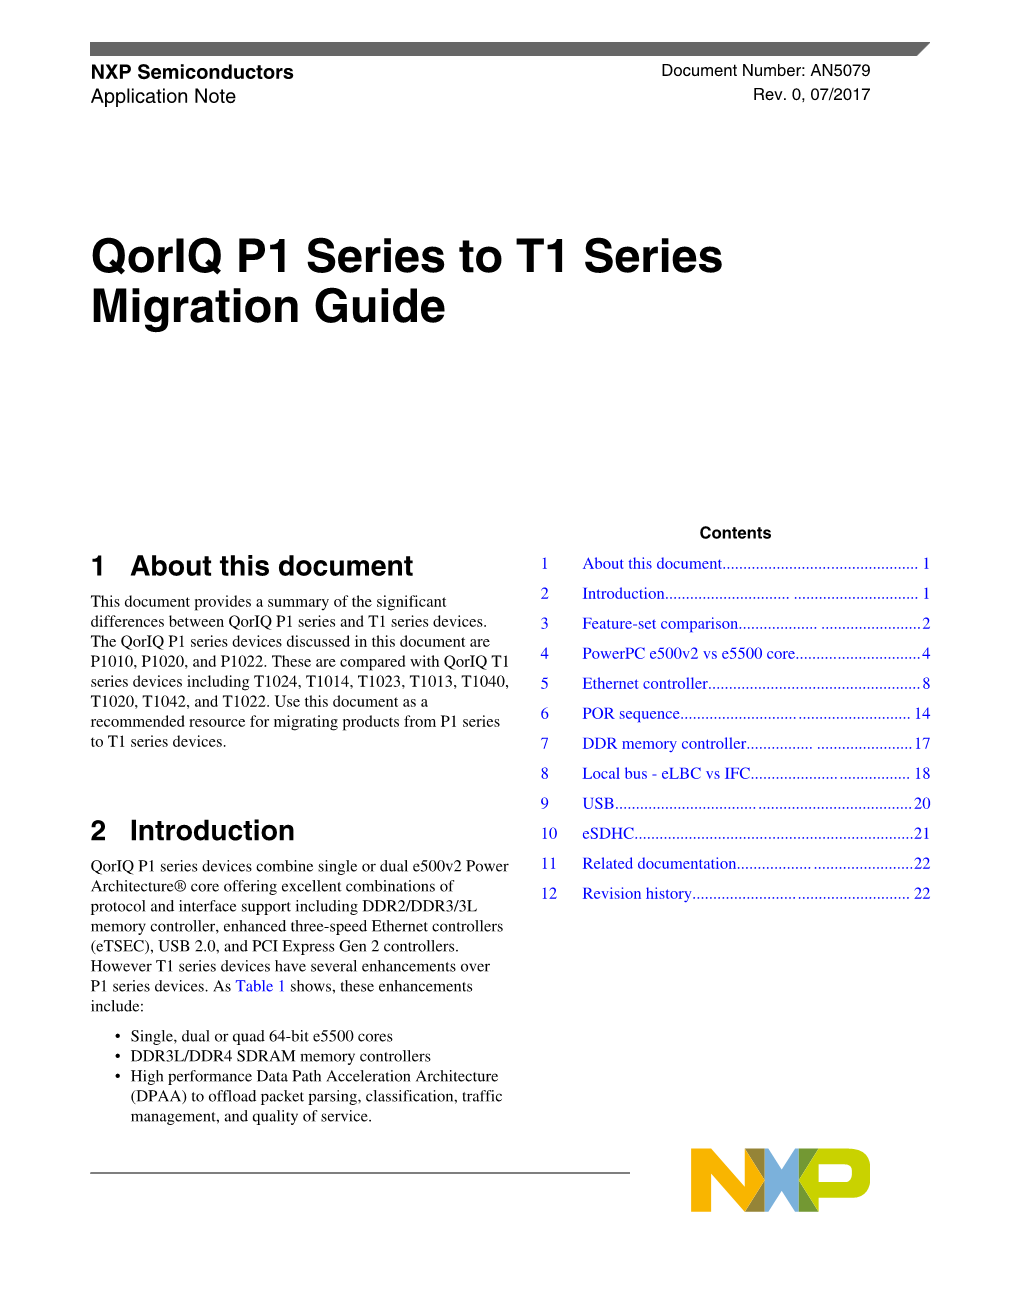 AN5079, Qoriq P1 Series to T1 Series Migration Guide